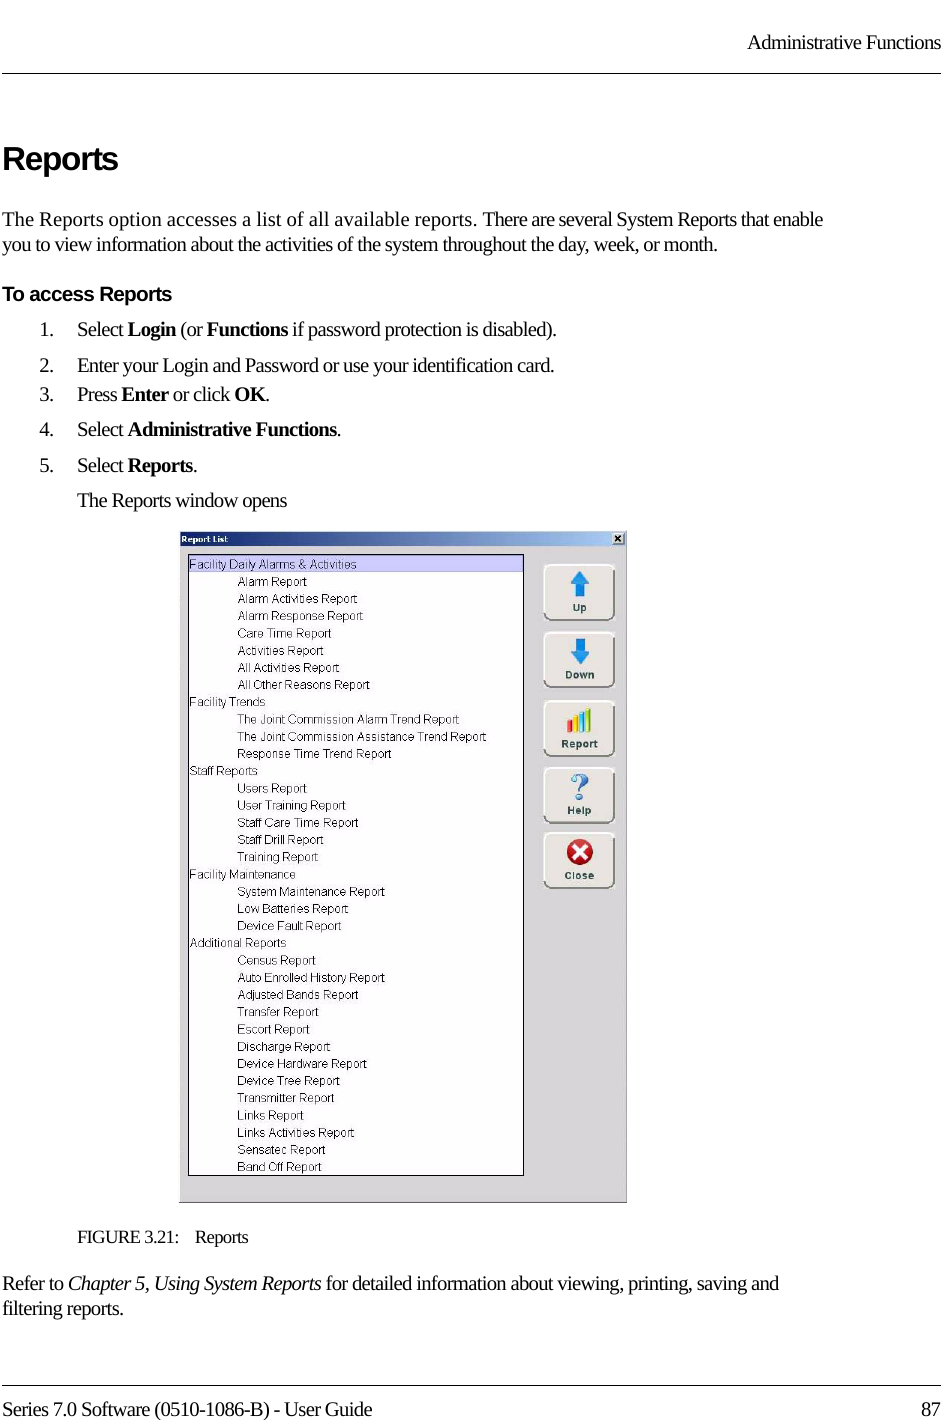 Series 7.0 Software (0510-1086-B) - User Guide  87Administrative FunctionsReportsThe Reports option accesses a list of all available reports. There are several System Reports that enable you to view information about the activities of the system throughout the day, week, or month.To access Reports1.    Select Login (or Functions if password protection is disabled).2.    Enter your Login and Password or use your identification card. 3.    Press Enter or click OK.4.    Select Administrative Functions.5.    Select Reports.The Reports window opensFIGURE 3.21:    ReportsRefer to Chapter 5, Using System Reports for detailed information about viewing, printing, saving and filtering reports.